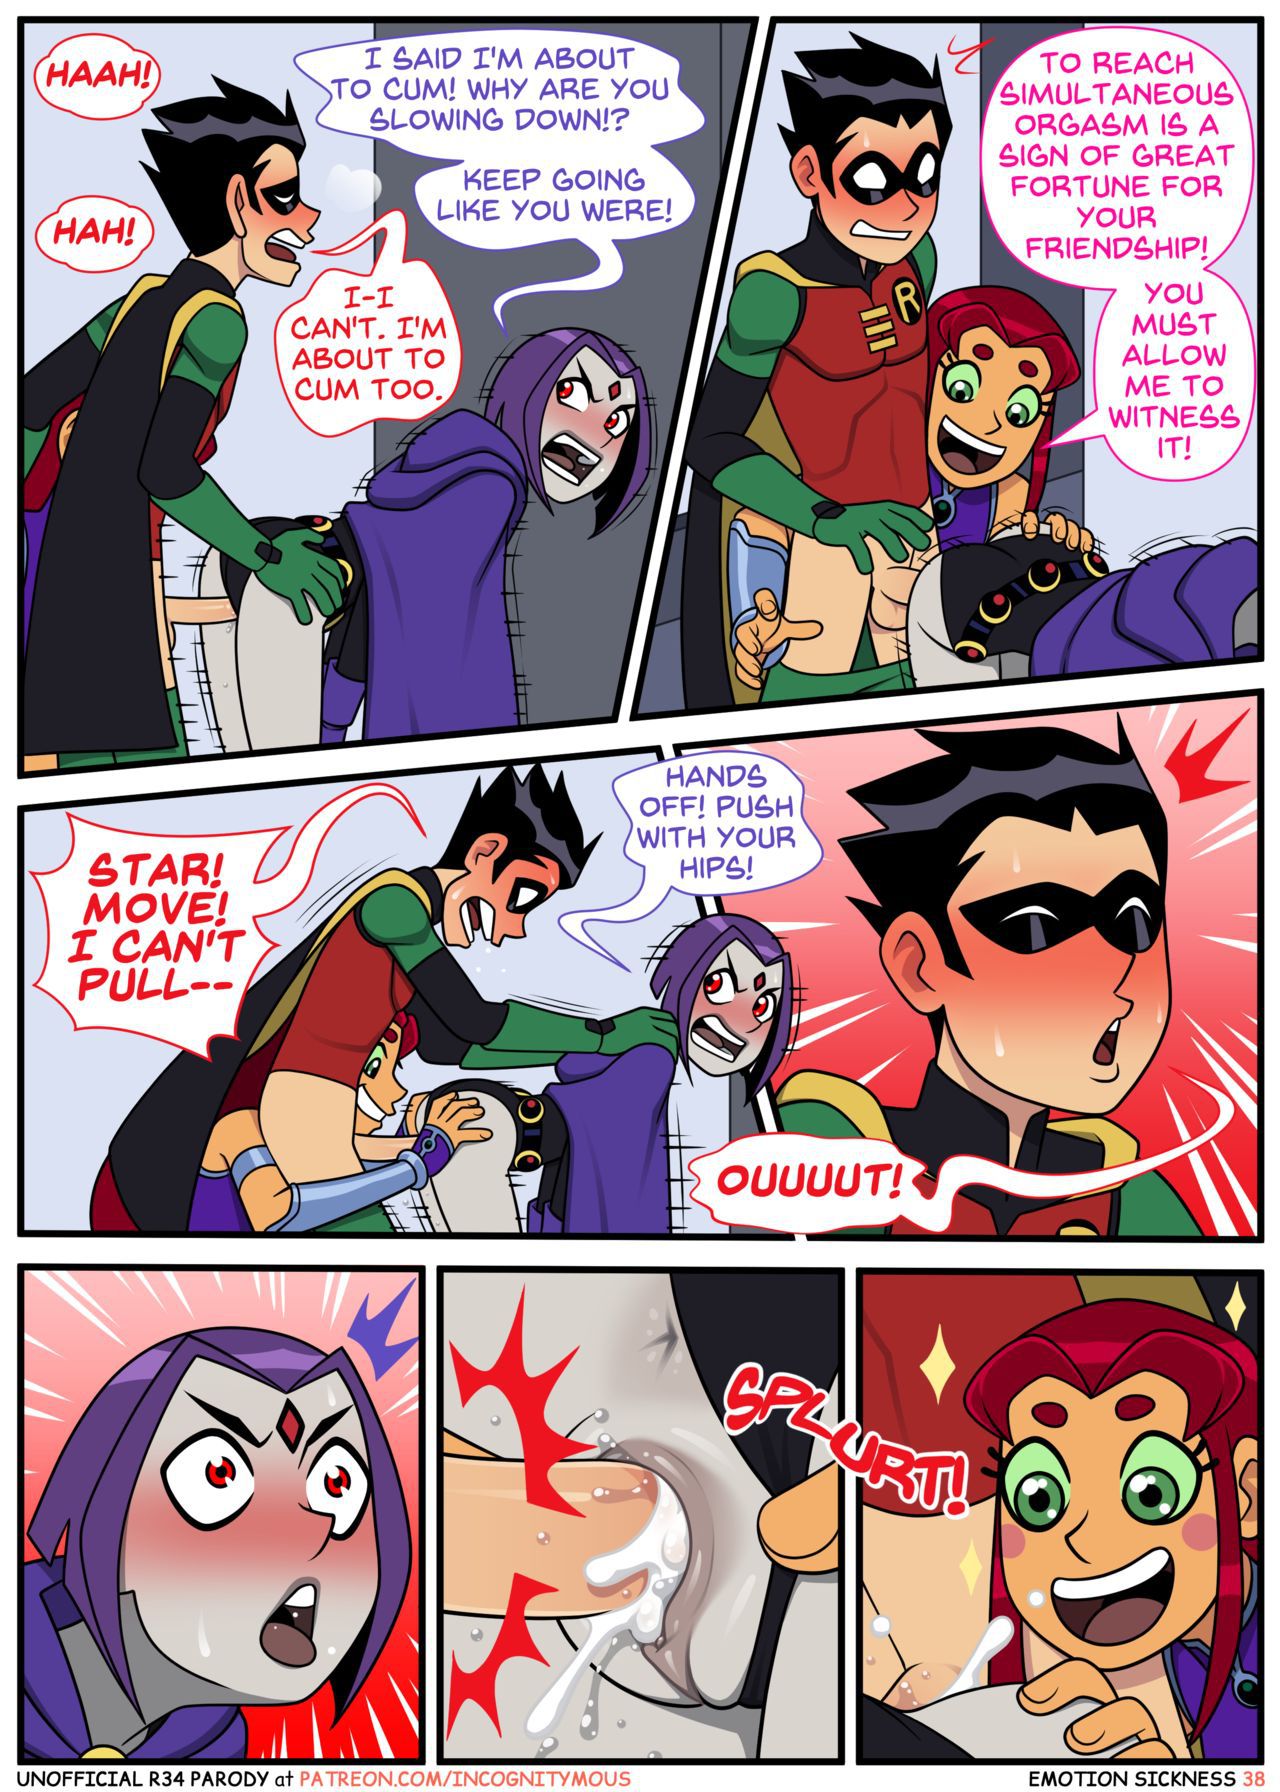 (Incognitymous) Teen Titans - Emotion Sickness(ongoing) 37